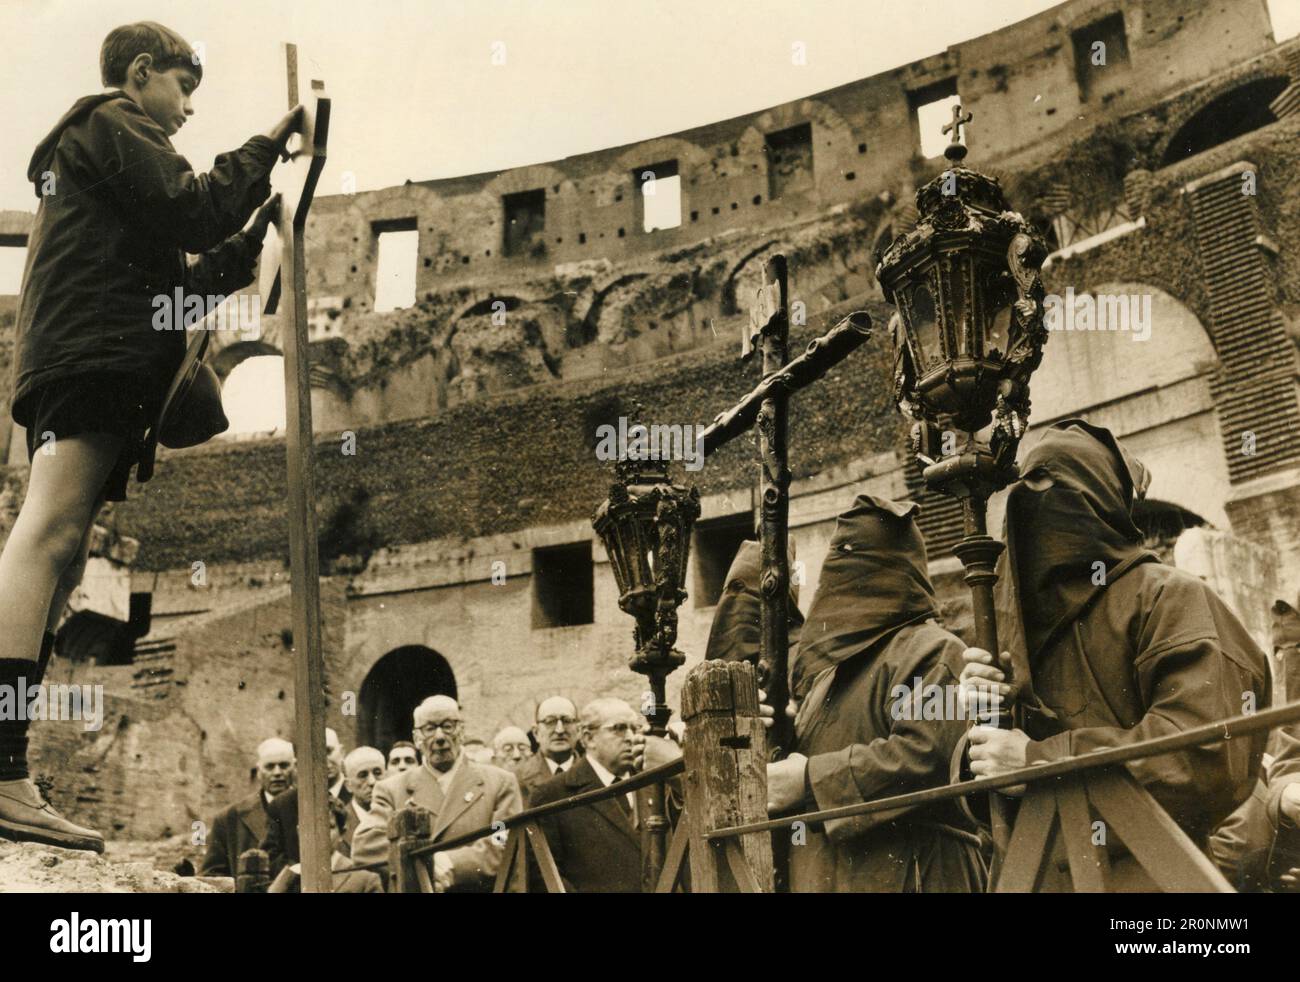 Via Crucis procession at the Colosseum with hooded religious brotherhood members, Rome, Italy 1950s Stock Photo